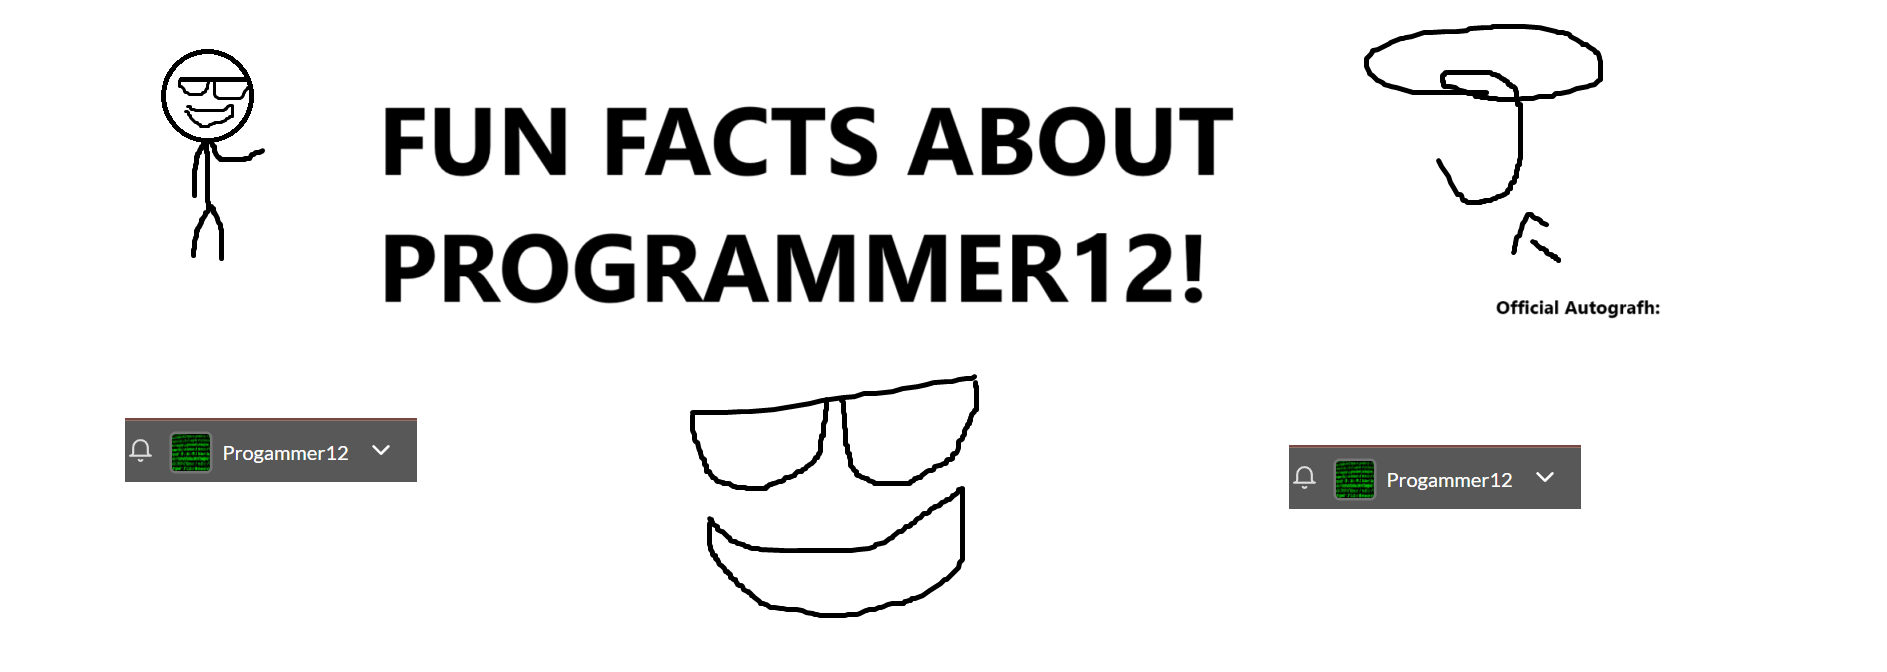 Fun Facts About Programmer12 (Me)